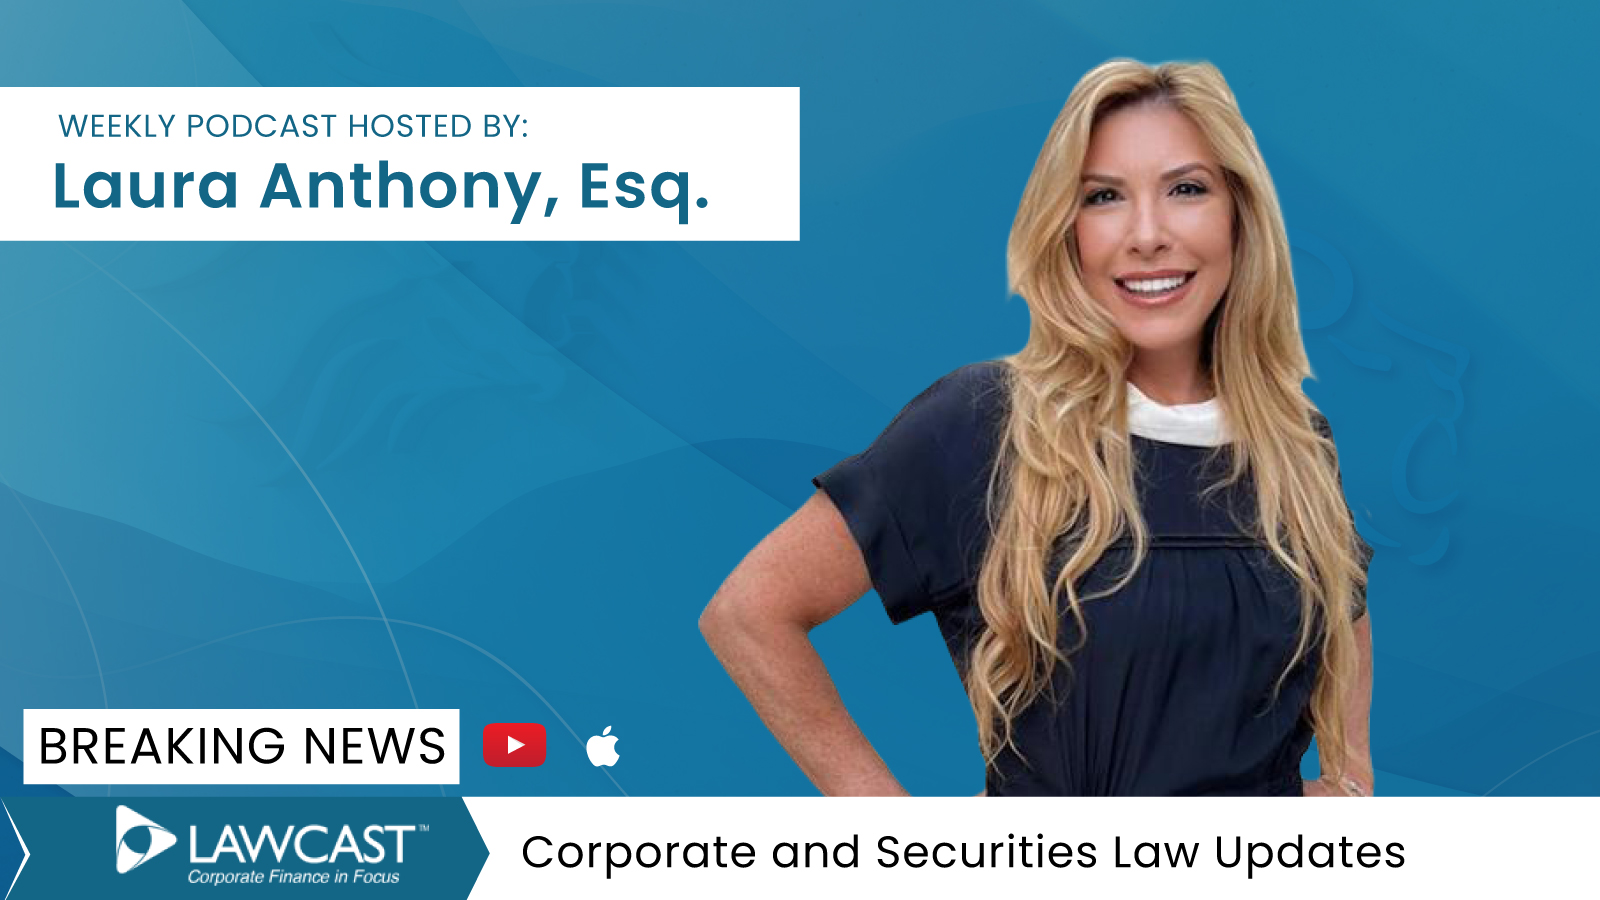 Laura Anthony, Esquire, founding partner of Anthony L.G., PLLC LAWCAST